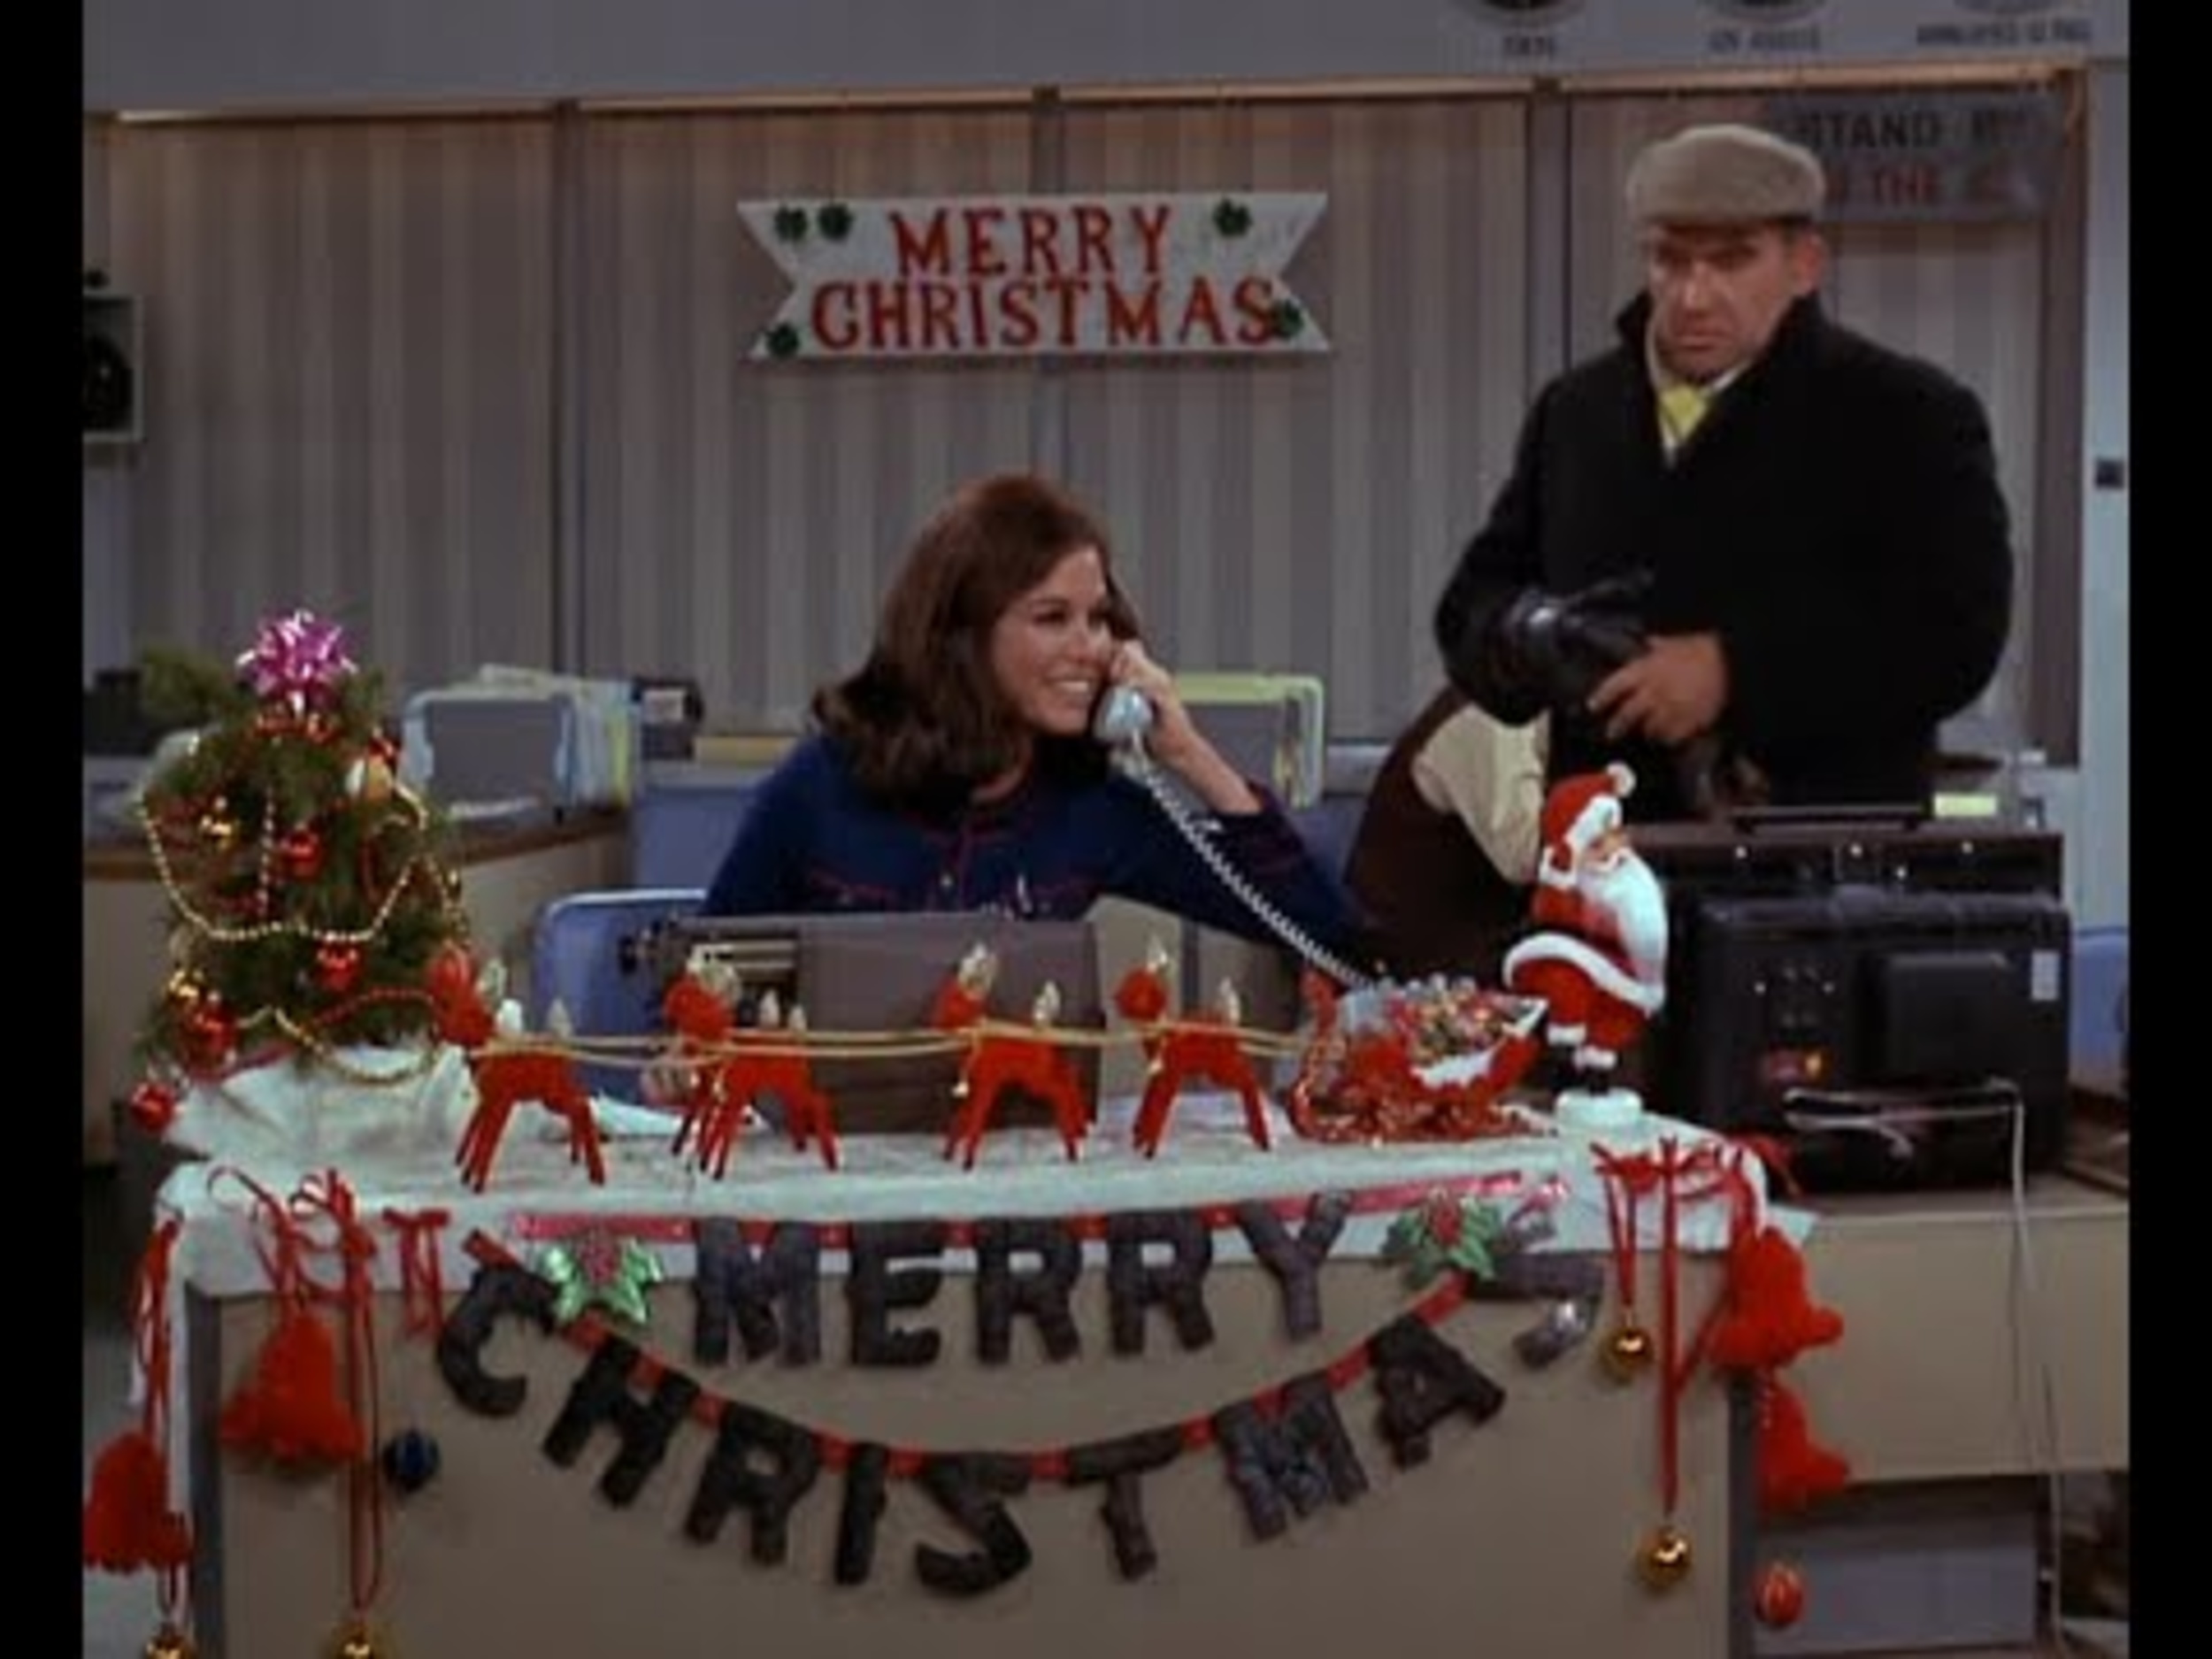 <p>OK, so to get the name of this episode you have to know that there is an episode of “That Girl” called “Christmas and the Hard-Luck Kid.” Let’s set that aside, though, and we get a great episode of television. In the first Christmas episode of the show, Mary is left to work on Christmas Day and Christmas Eve, including being in the office alone at night. It’s somber and a little melancholic, but also extremely funny.</p><p>You may also like: <a href='https://www.yardbarker.com/entertainment/articles/25_underrated_comedy_films_031324/s1__38765218'>25 underrated comedy films</a></p>